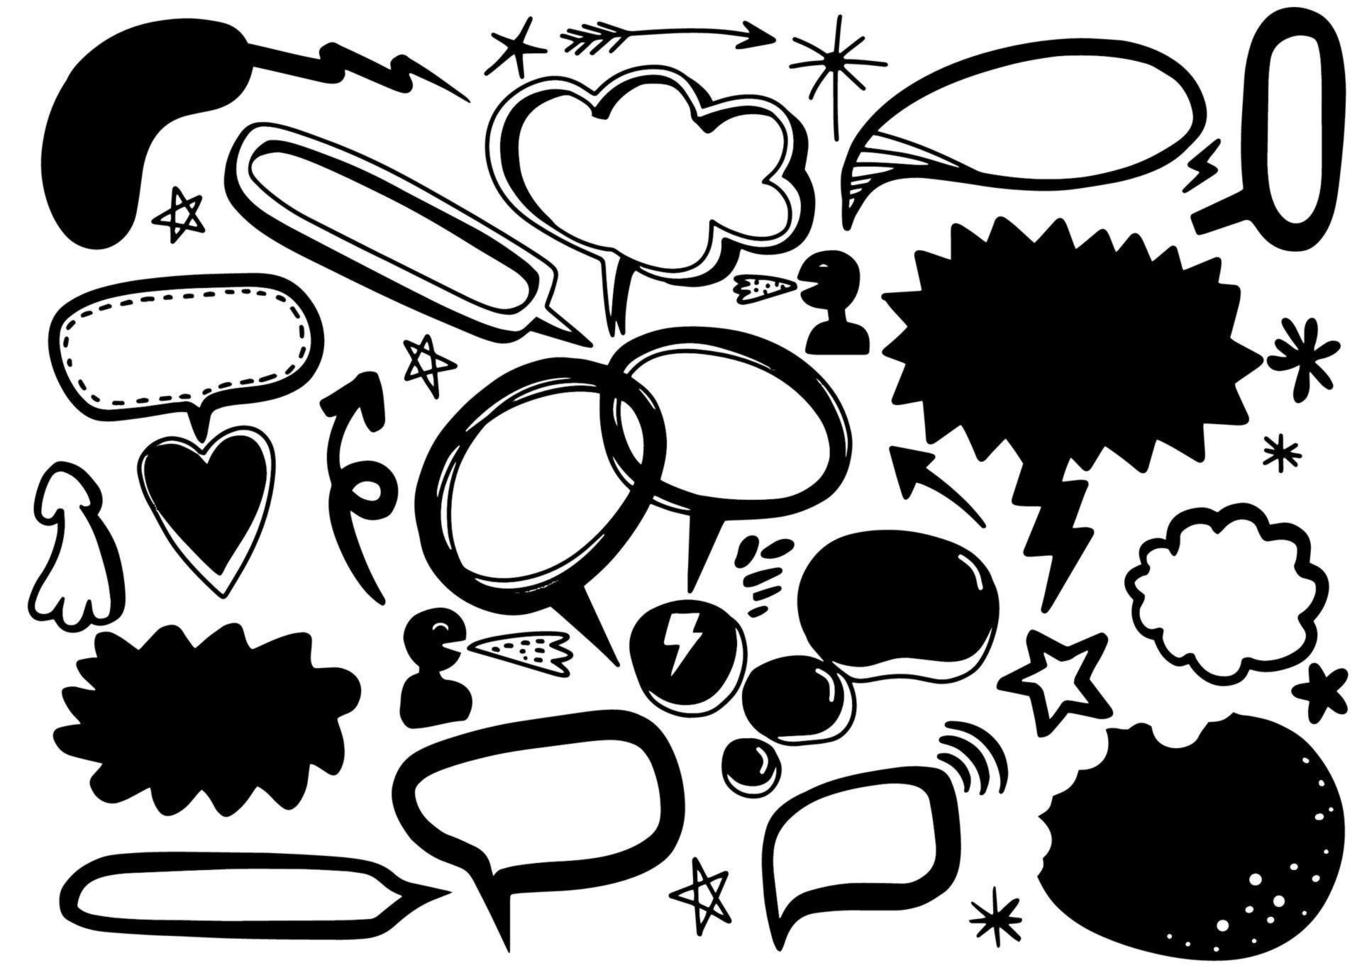 Hand drawn set of different speech bubbles,Stickers of speech bubbles vector set , Retro Set of Comics Speech and Bubbles Cartoon Vector, Each on a separate layer.